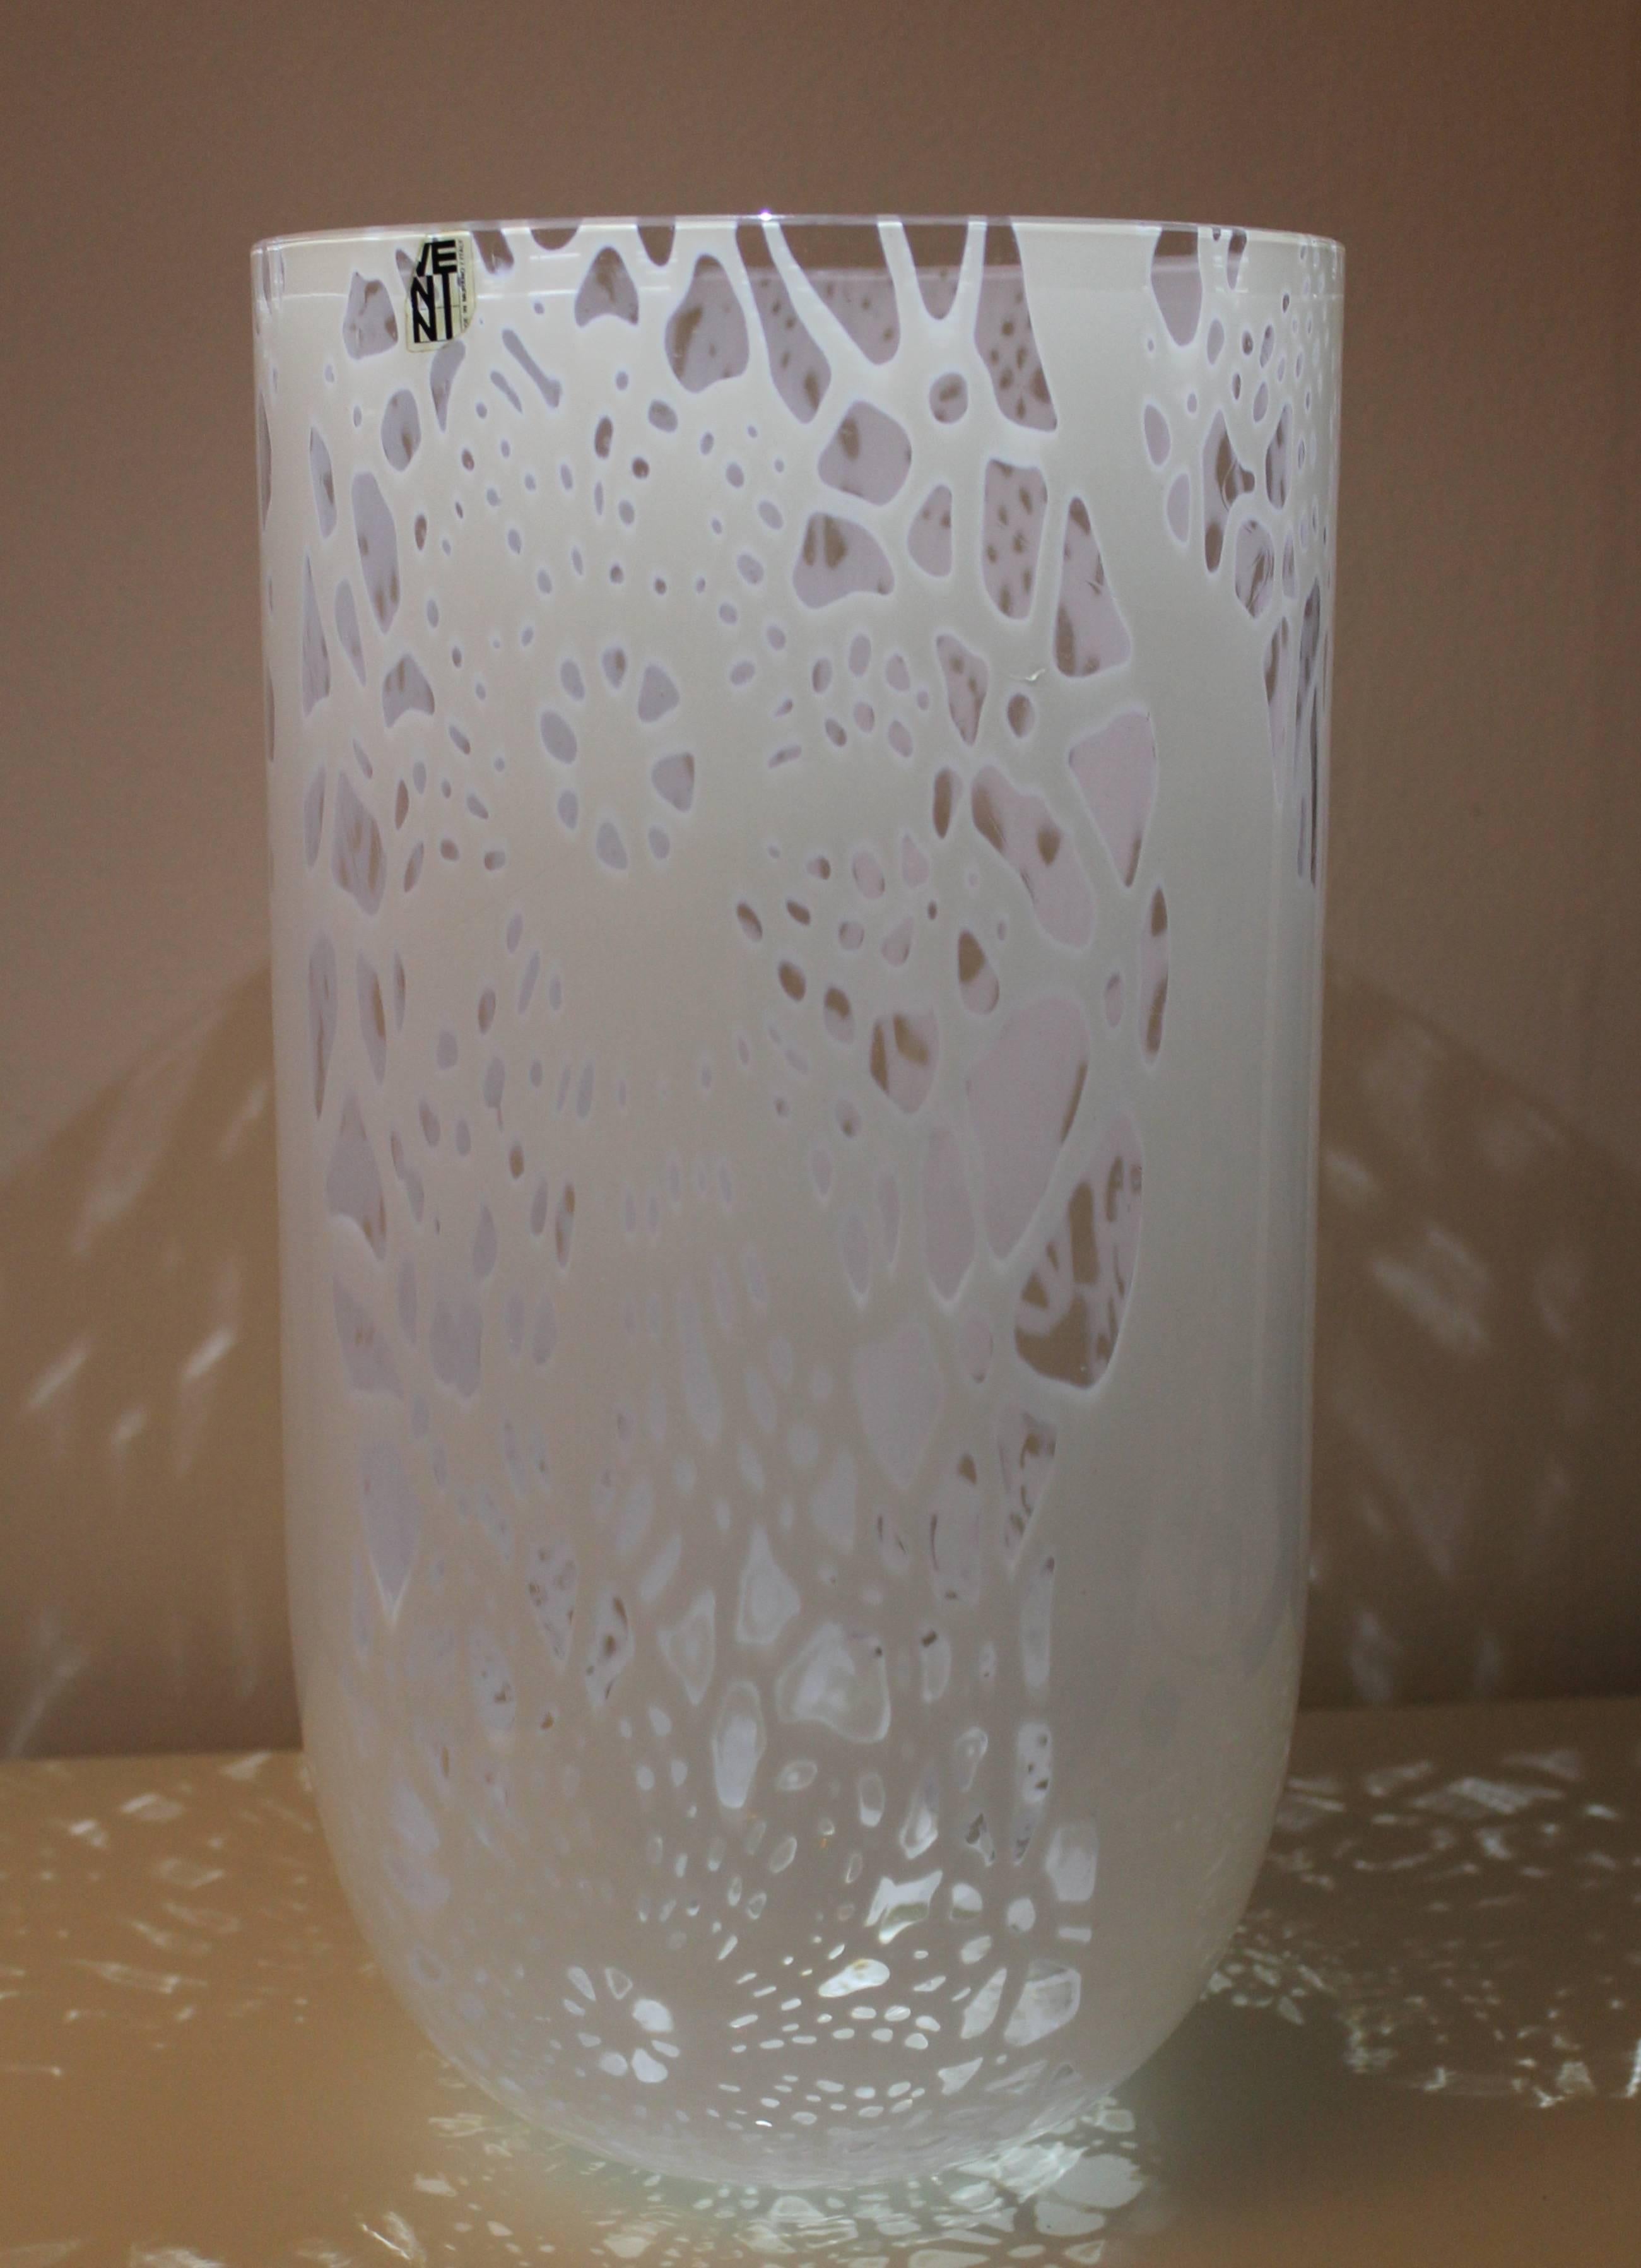 Remarkable 'merletto' vase by Owe Thorssen and Brigitta Karlsson for Venini Italia manufactures. Made by blown crystal and 'lattimo', engraved signature 'Venini Italia' on the base and originally labeled Venini.